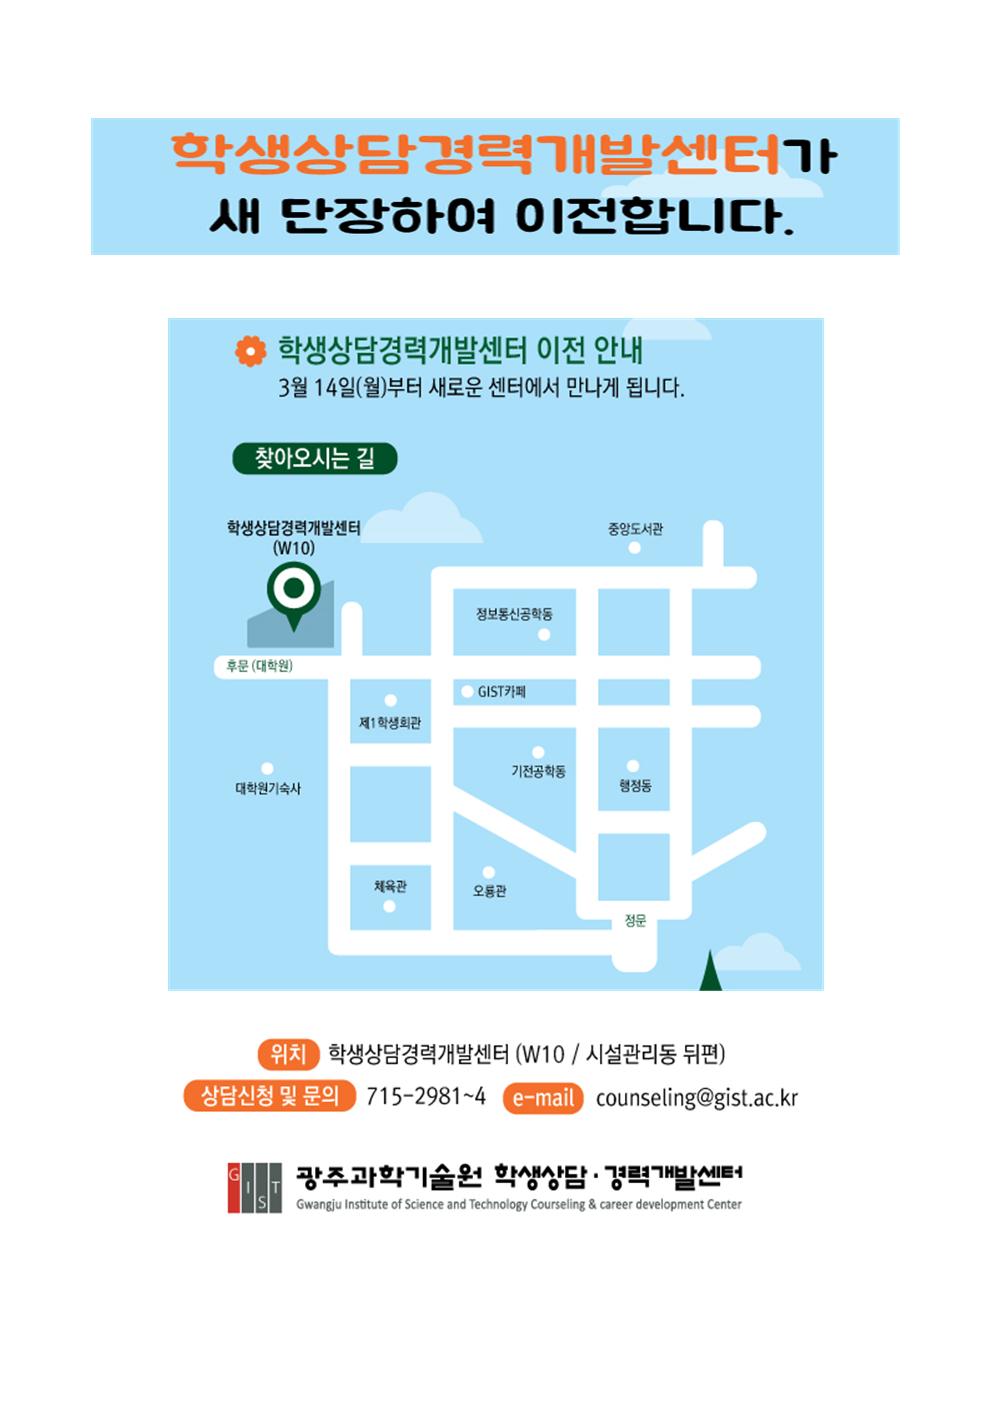 [NOTICE] Counseling and Career Development Center is moving into W10. 이미지